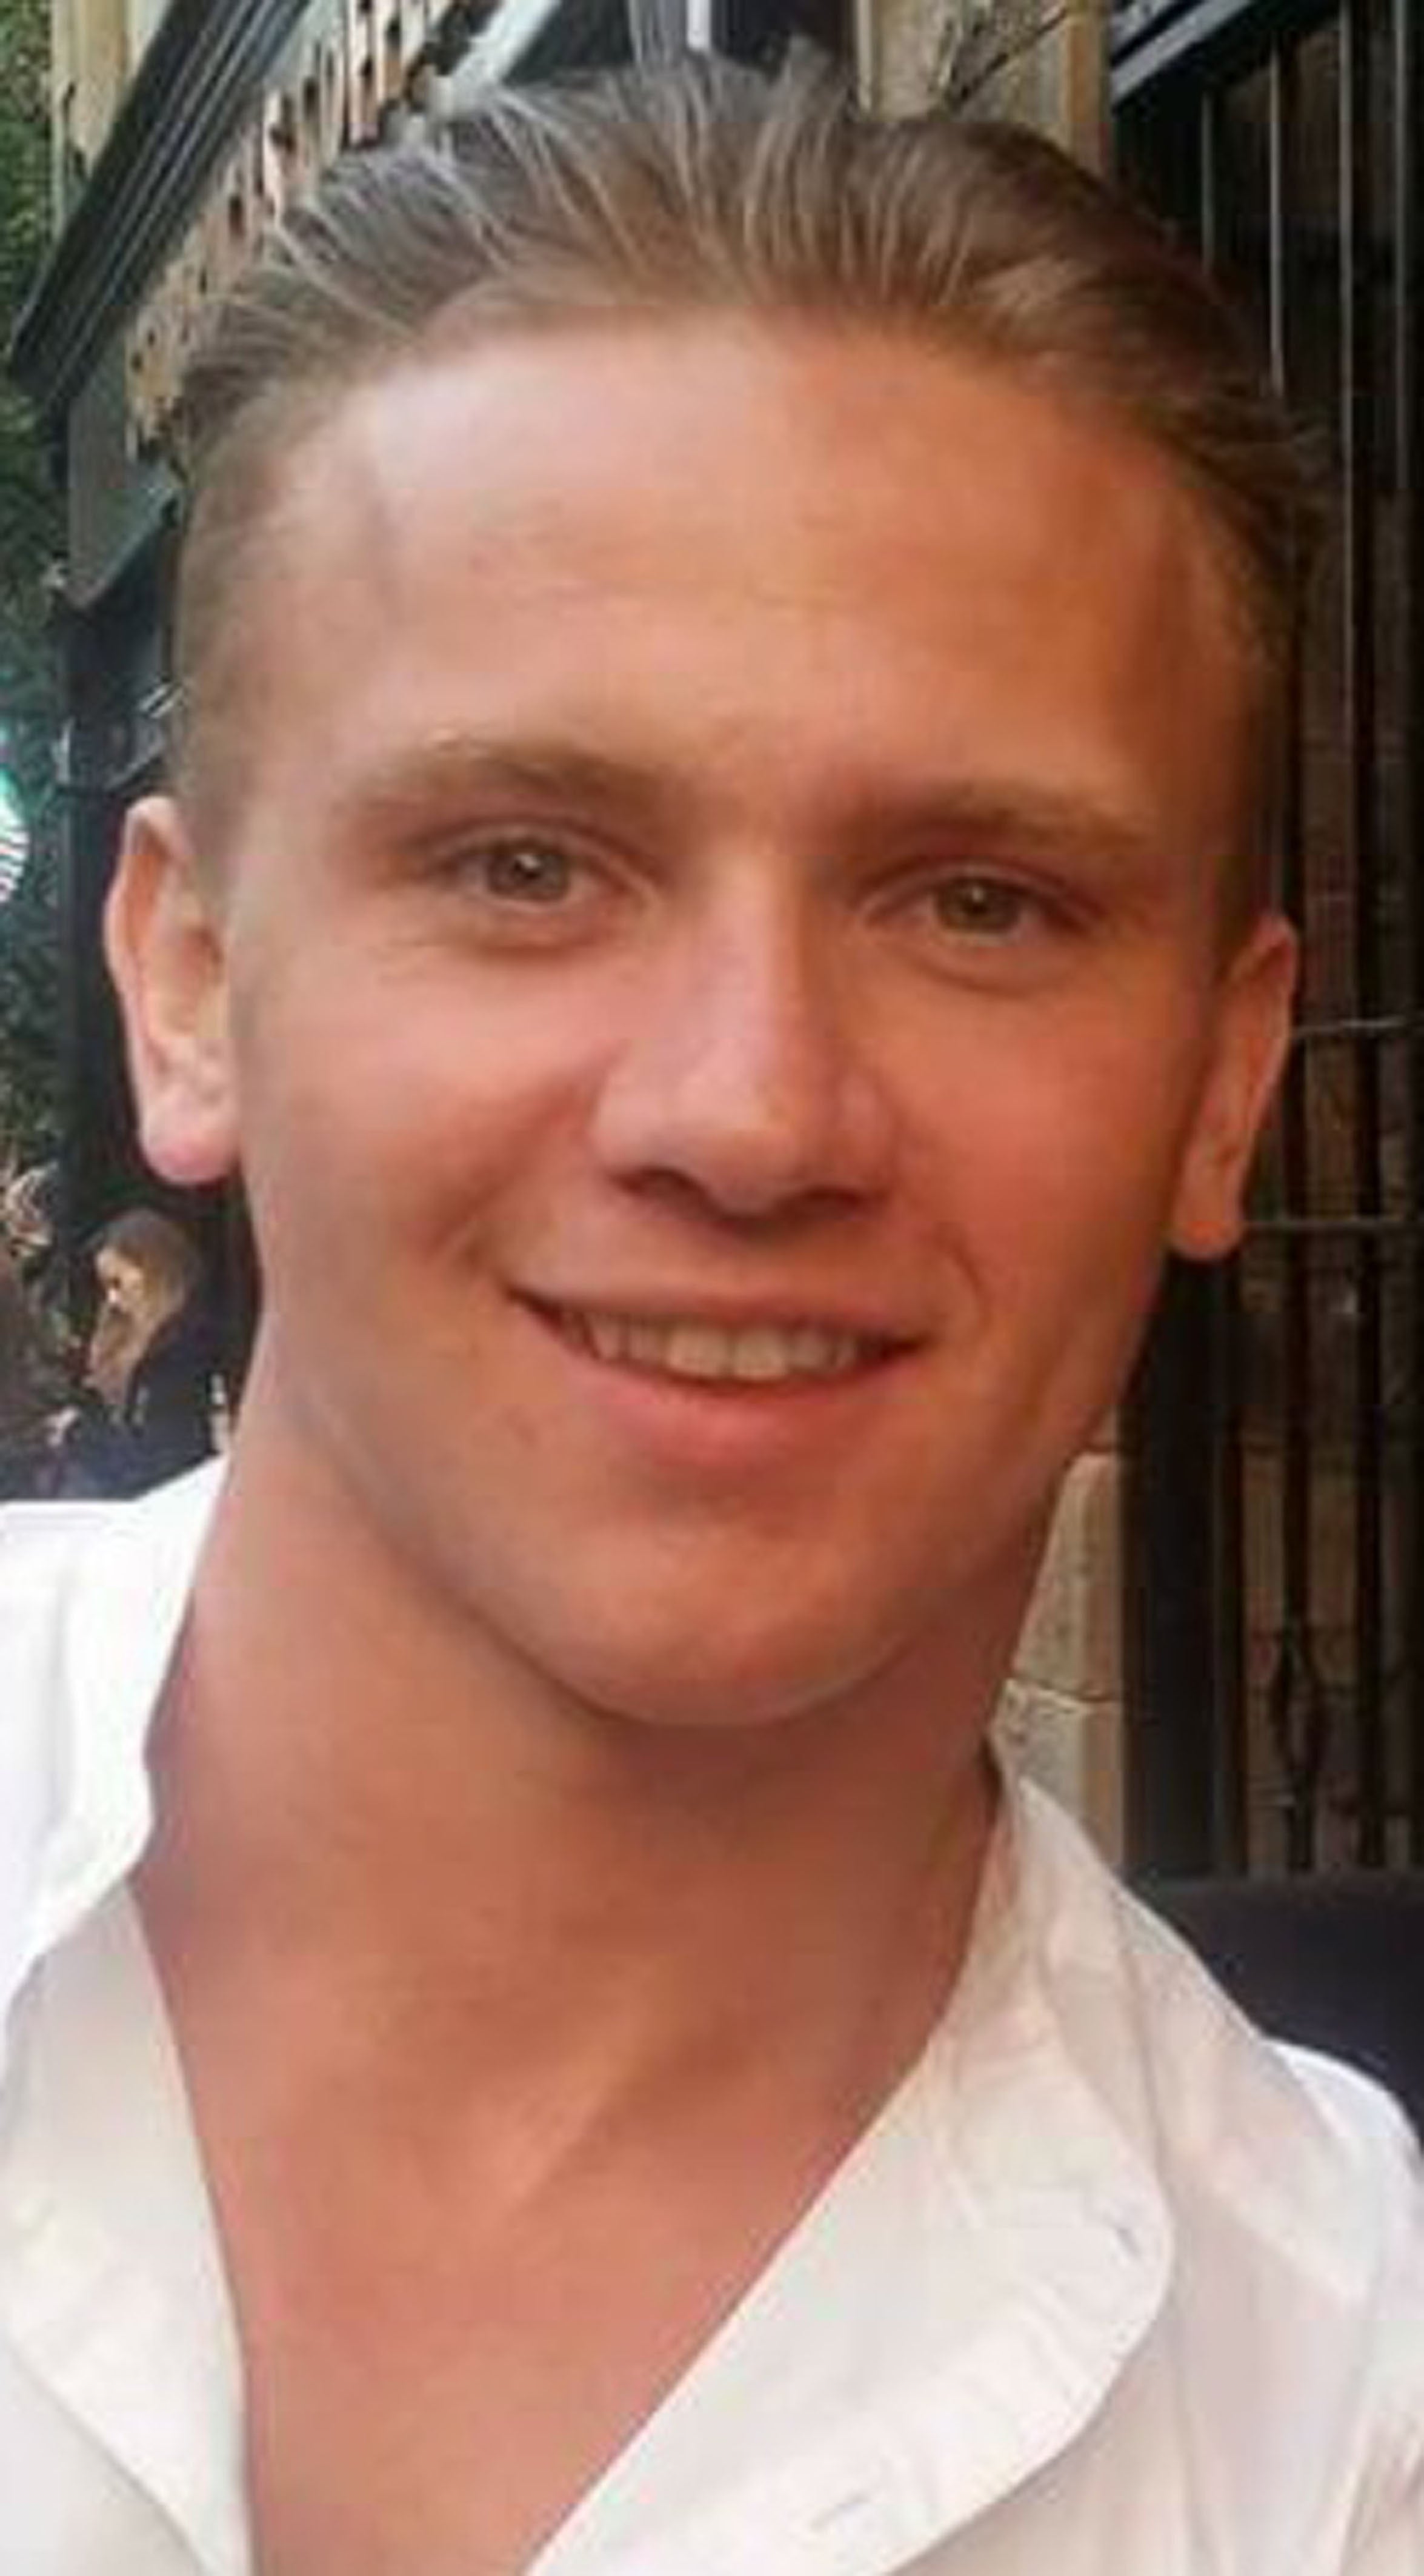 RAF gunner Corrie McKeague, who vanished on a night out in 2016, died after he went into a bin which was tipped into a waste lorry, an inquest has concluded (Suffolk Police/PA)